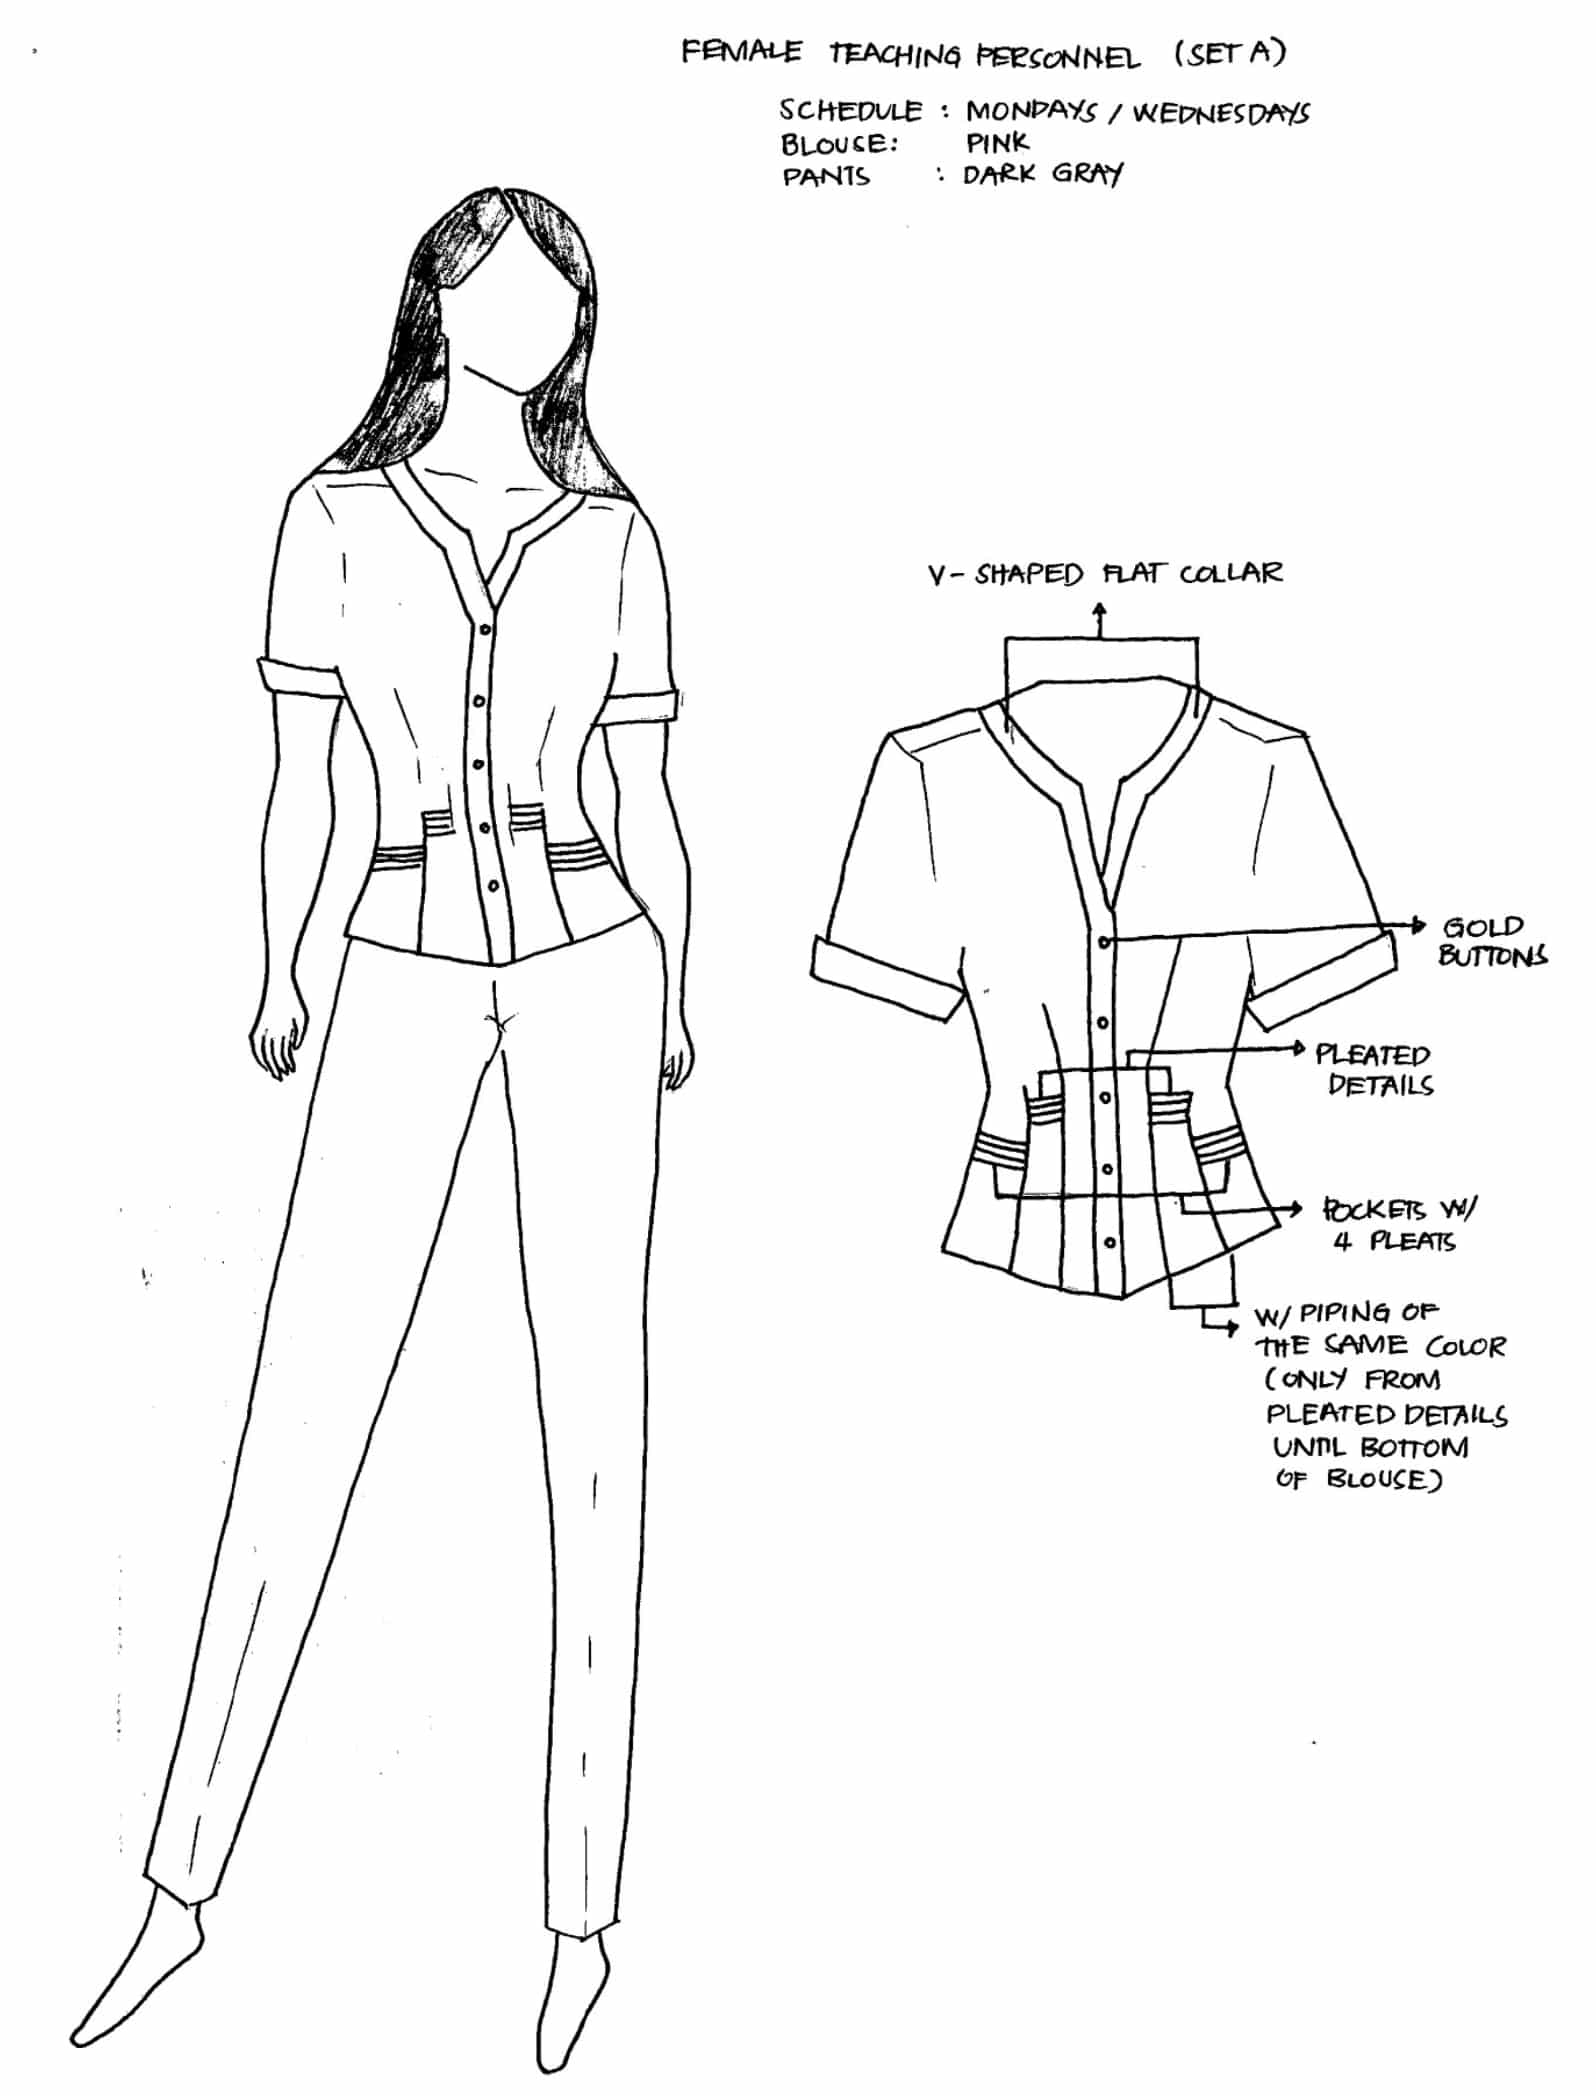 DepEd National Uniforms Female Teaching Personnel